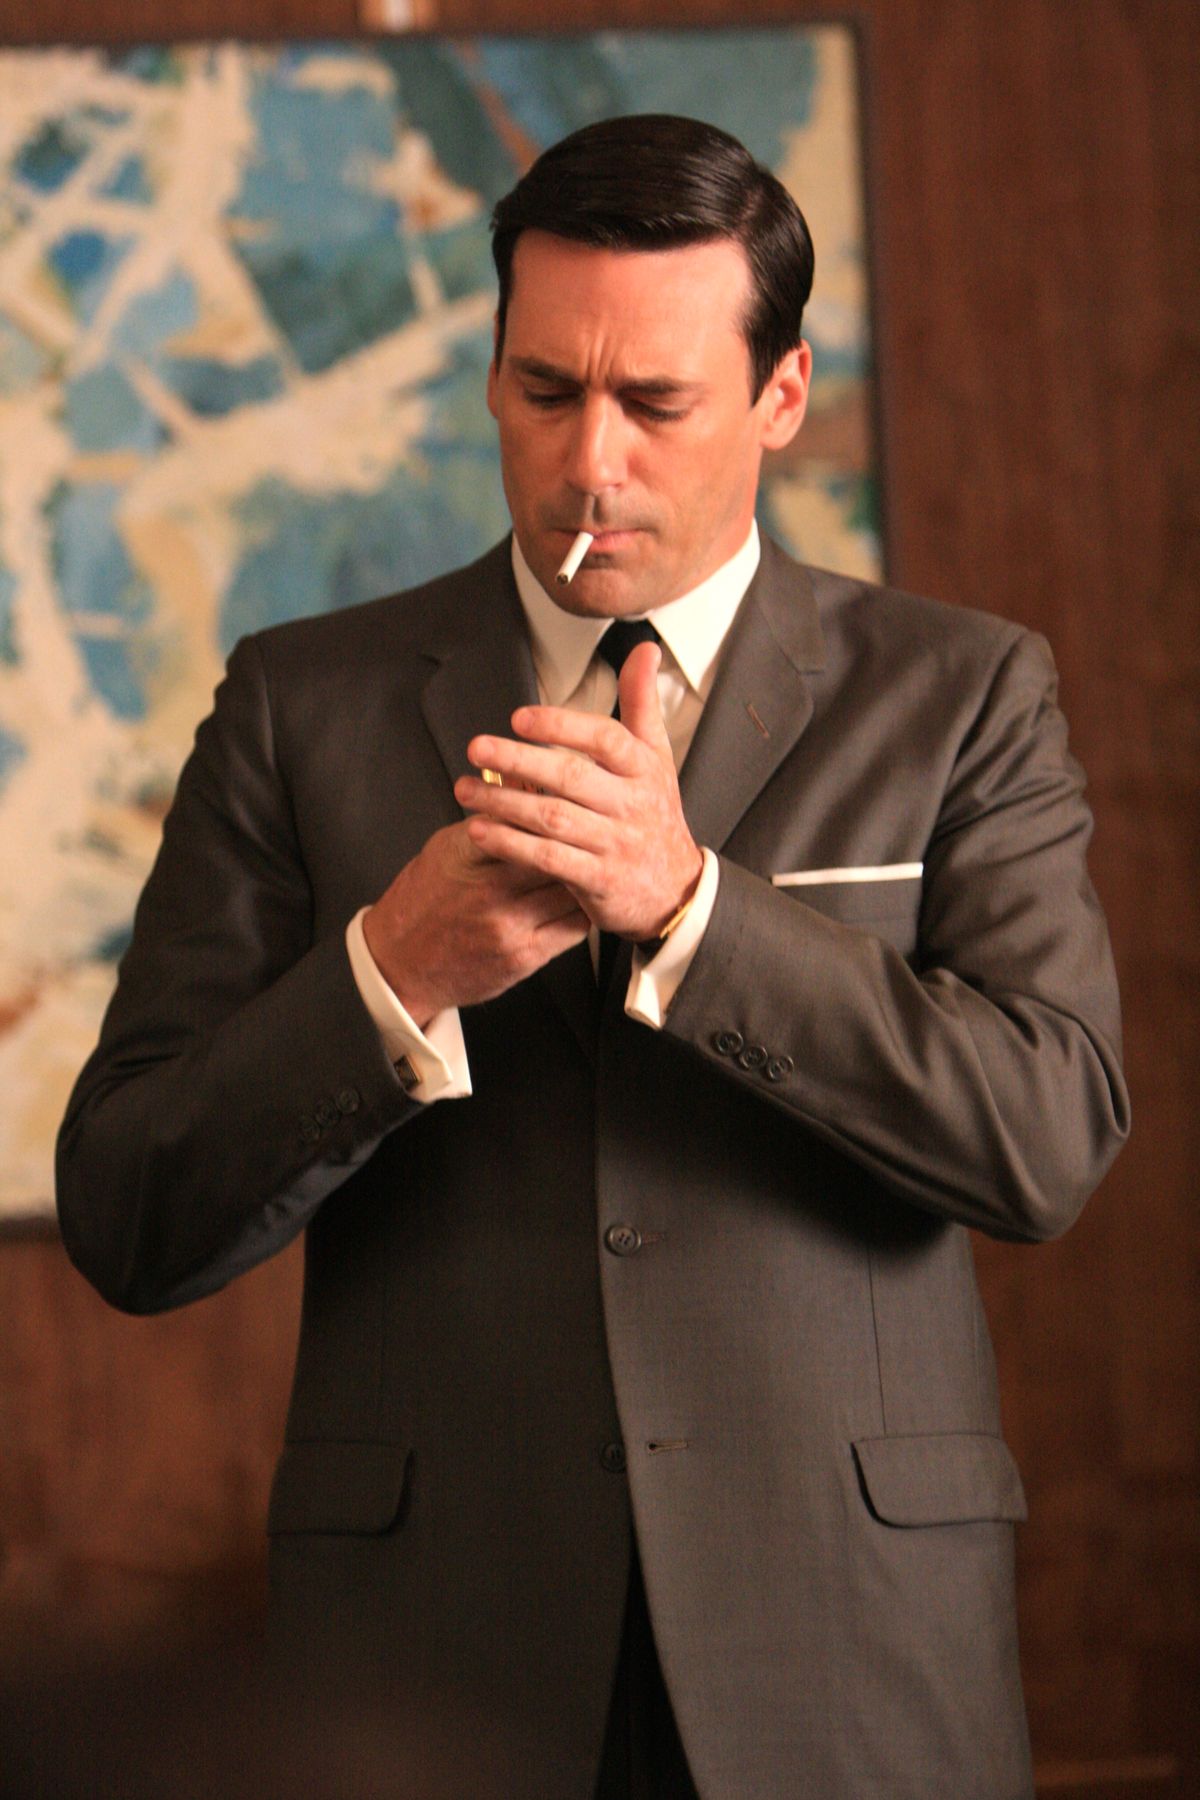 E02MadMenB - For Connors - Don Draper (Jon Hamm) lights up in the office during a meeting at Sterling Cooper. Image credit - Rainbow Media. Maximum width 72 picas at 200 dpi. 10/29/08 (Rainbow Media)